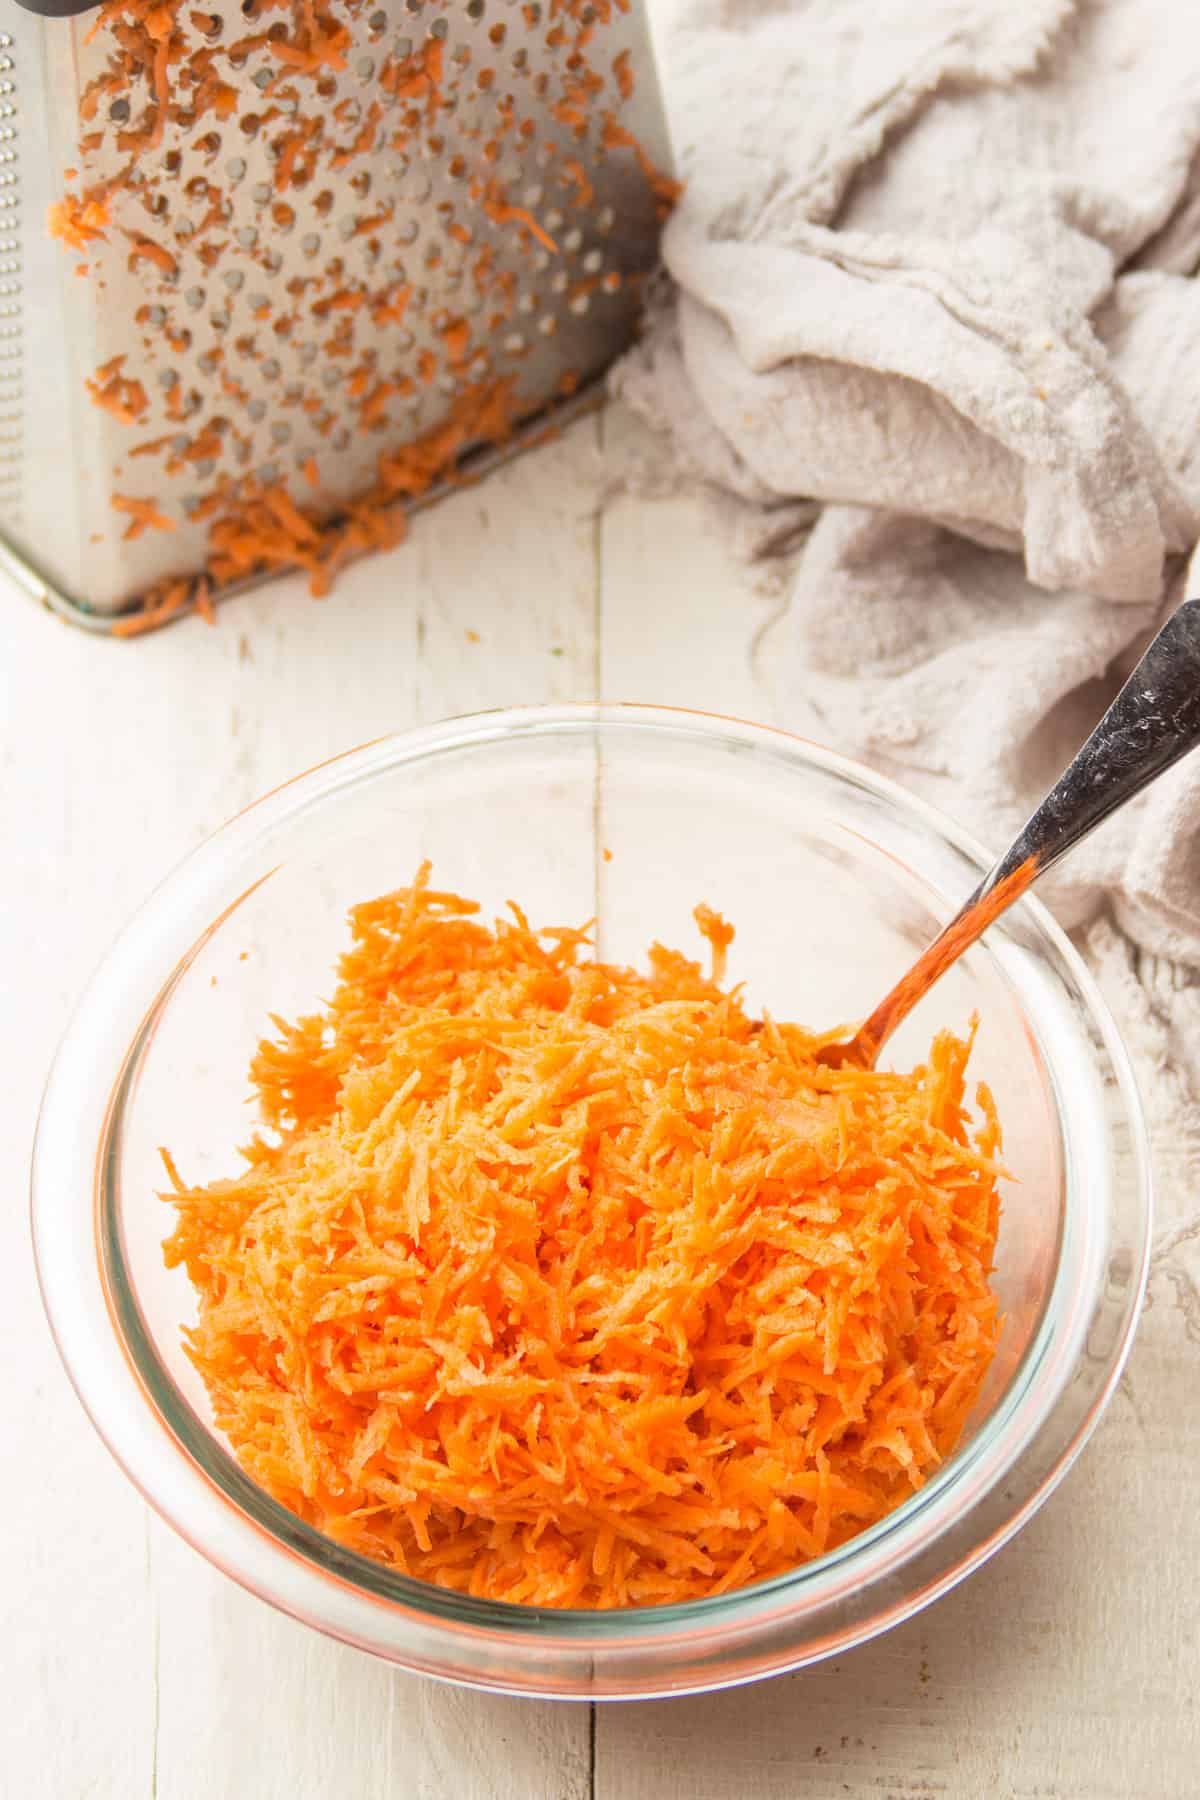 Bowl of Shredded Carrots with a Box Grater in the Background